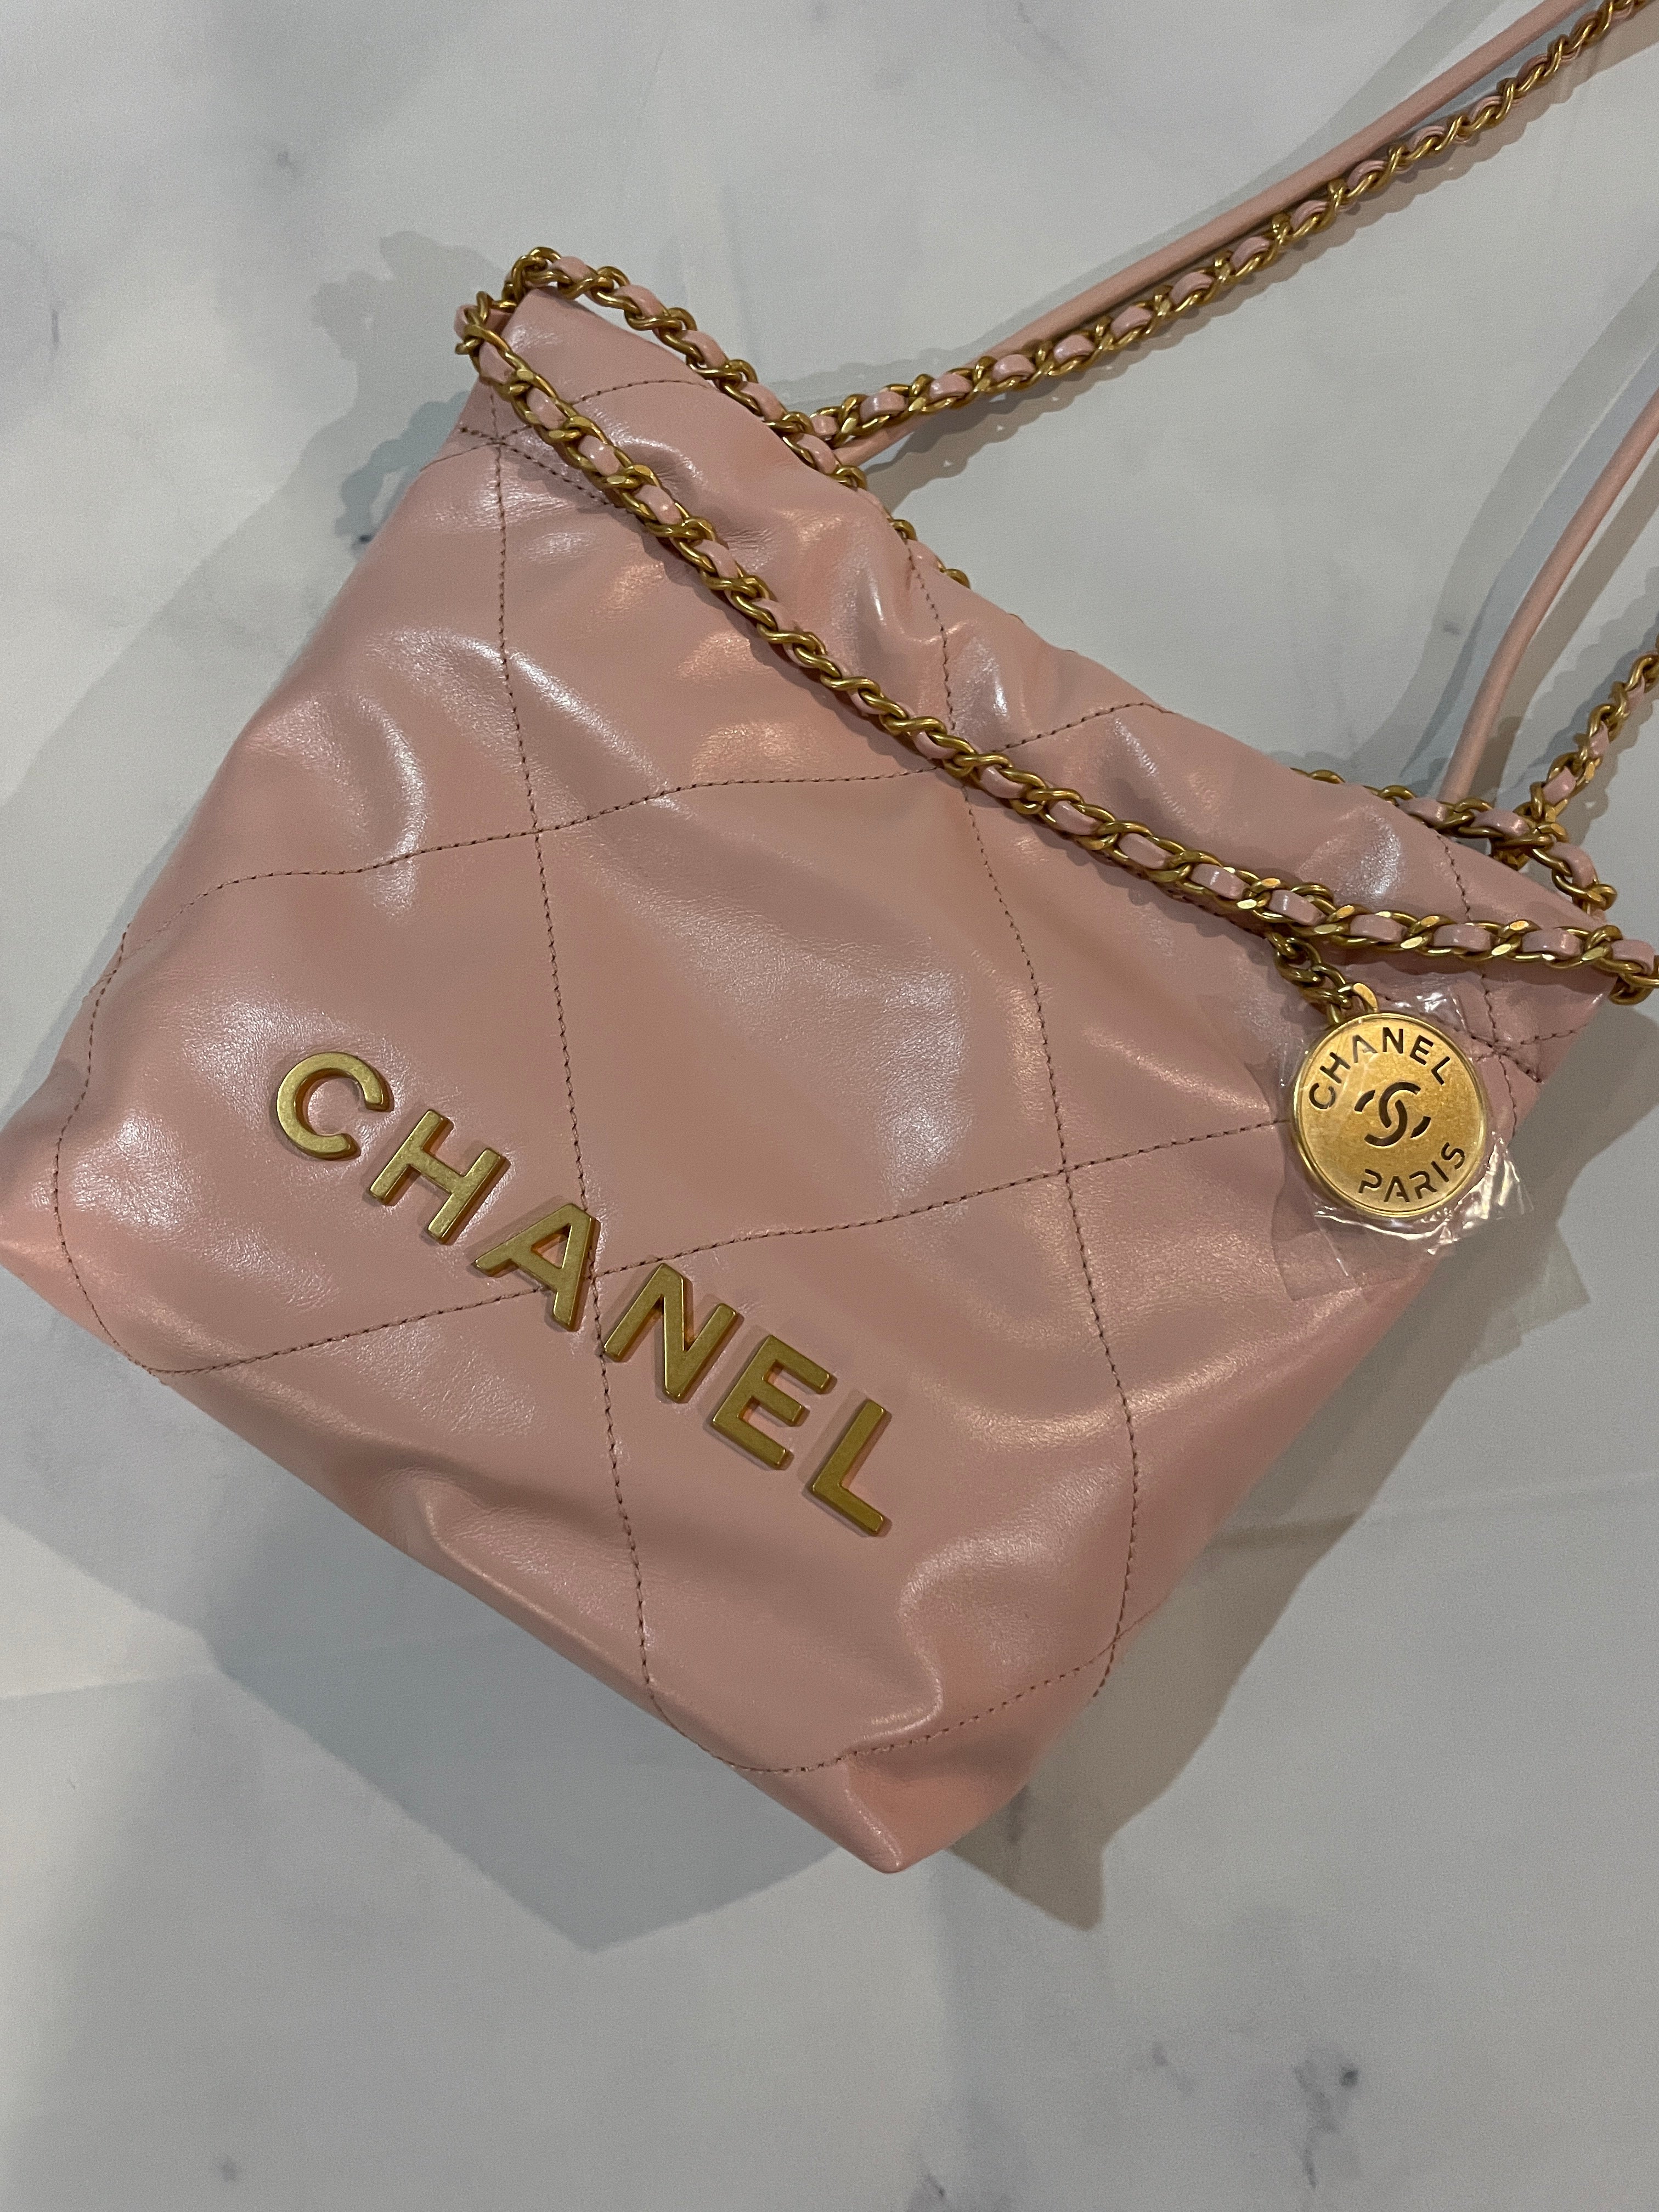 CHANEL, Bags, Chanel Mesh Tote With Pouch Gift With Purchase Or Vip